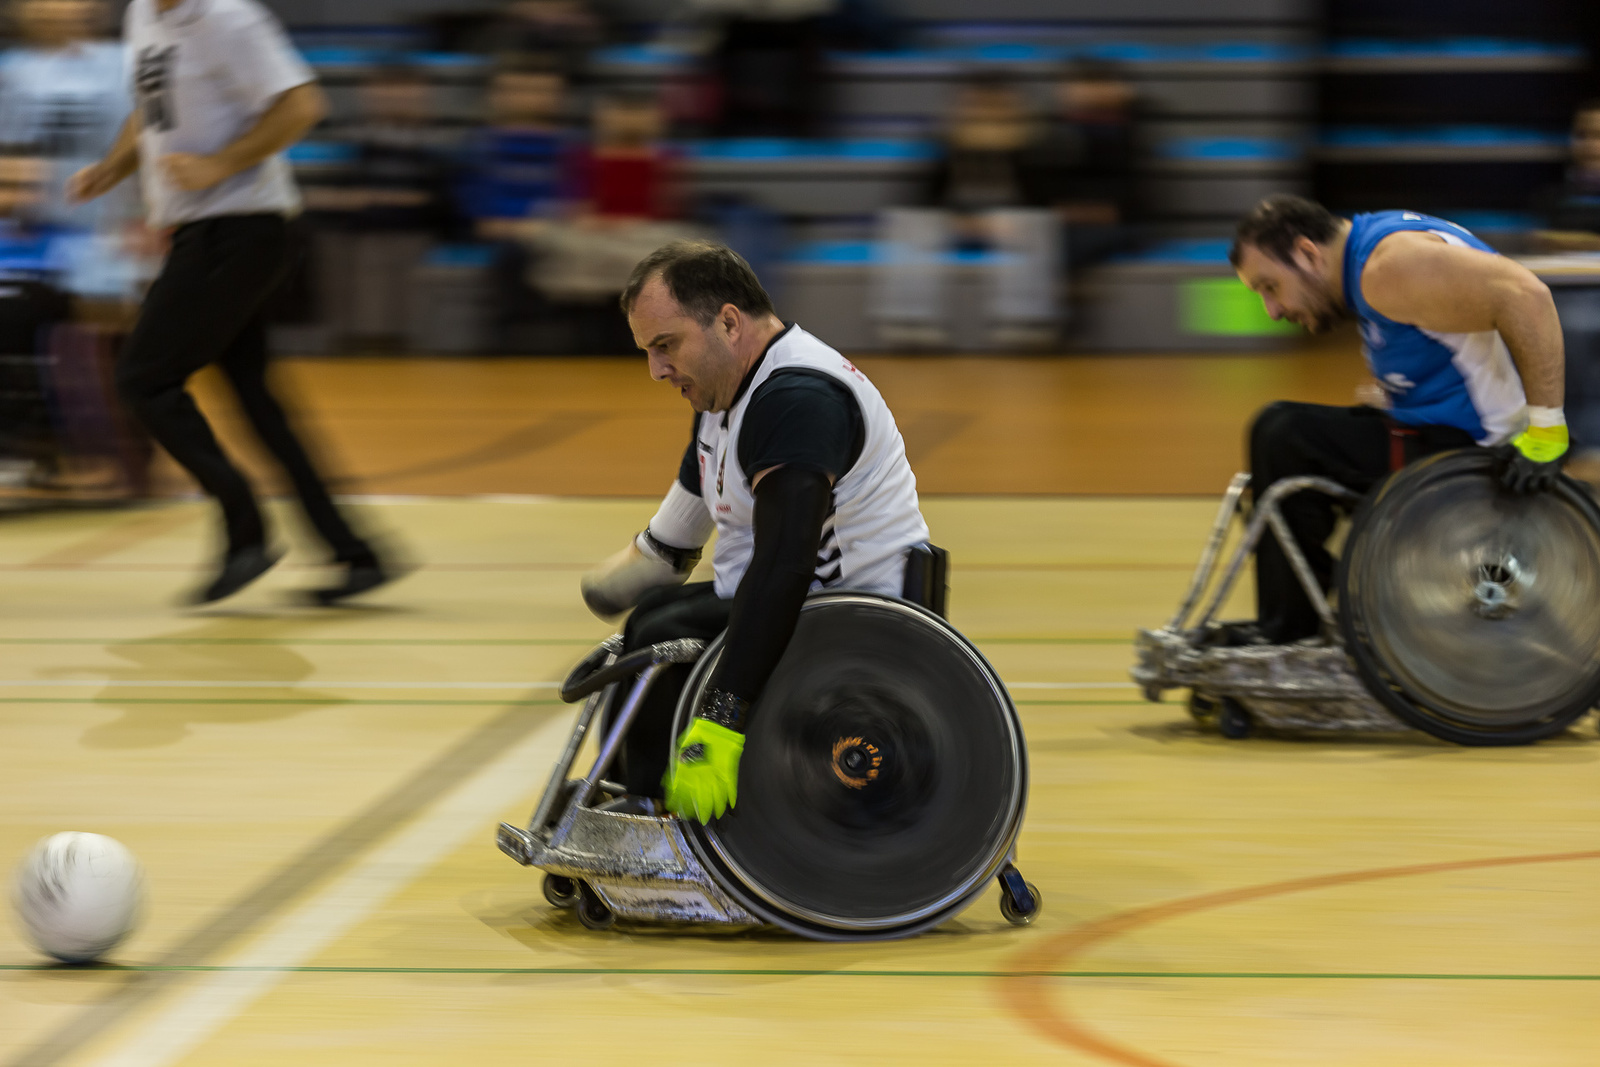 004 14 01 23 wheelchair rugby